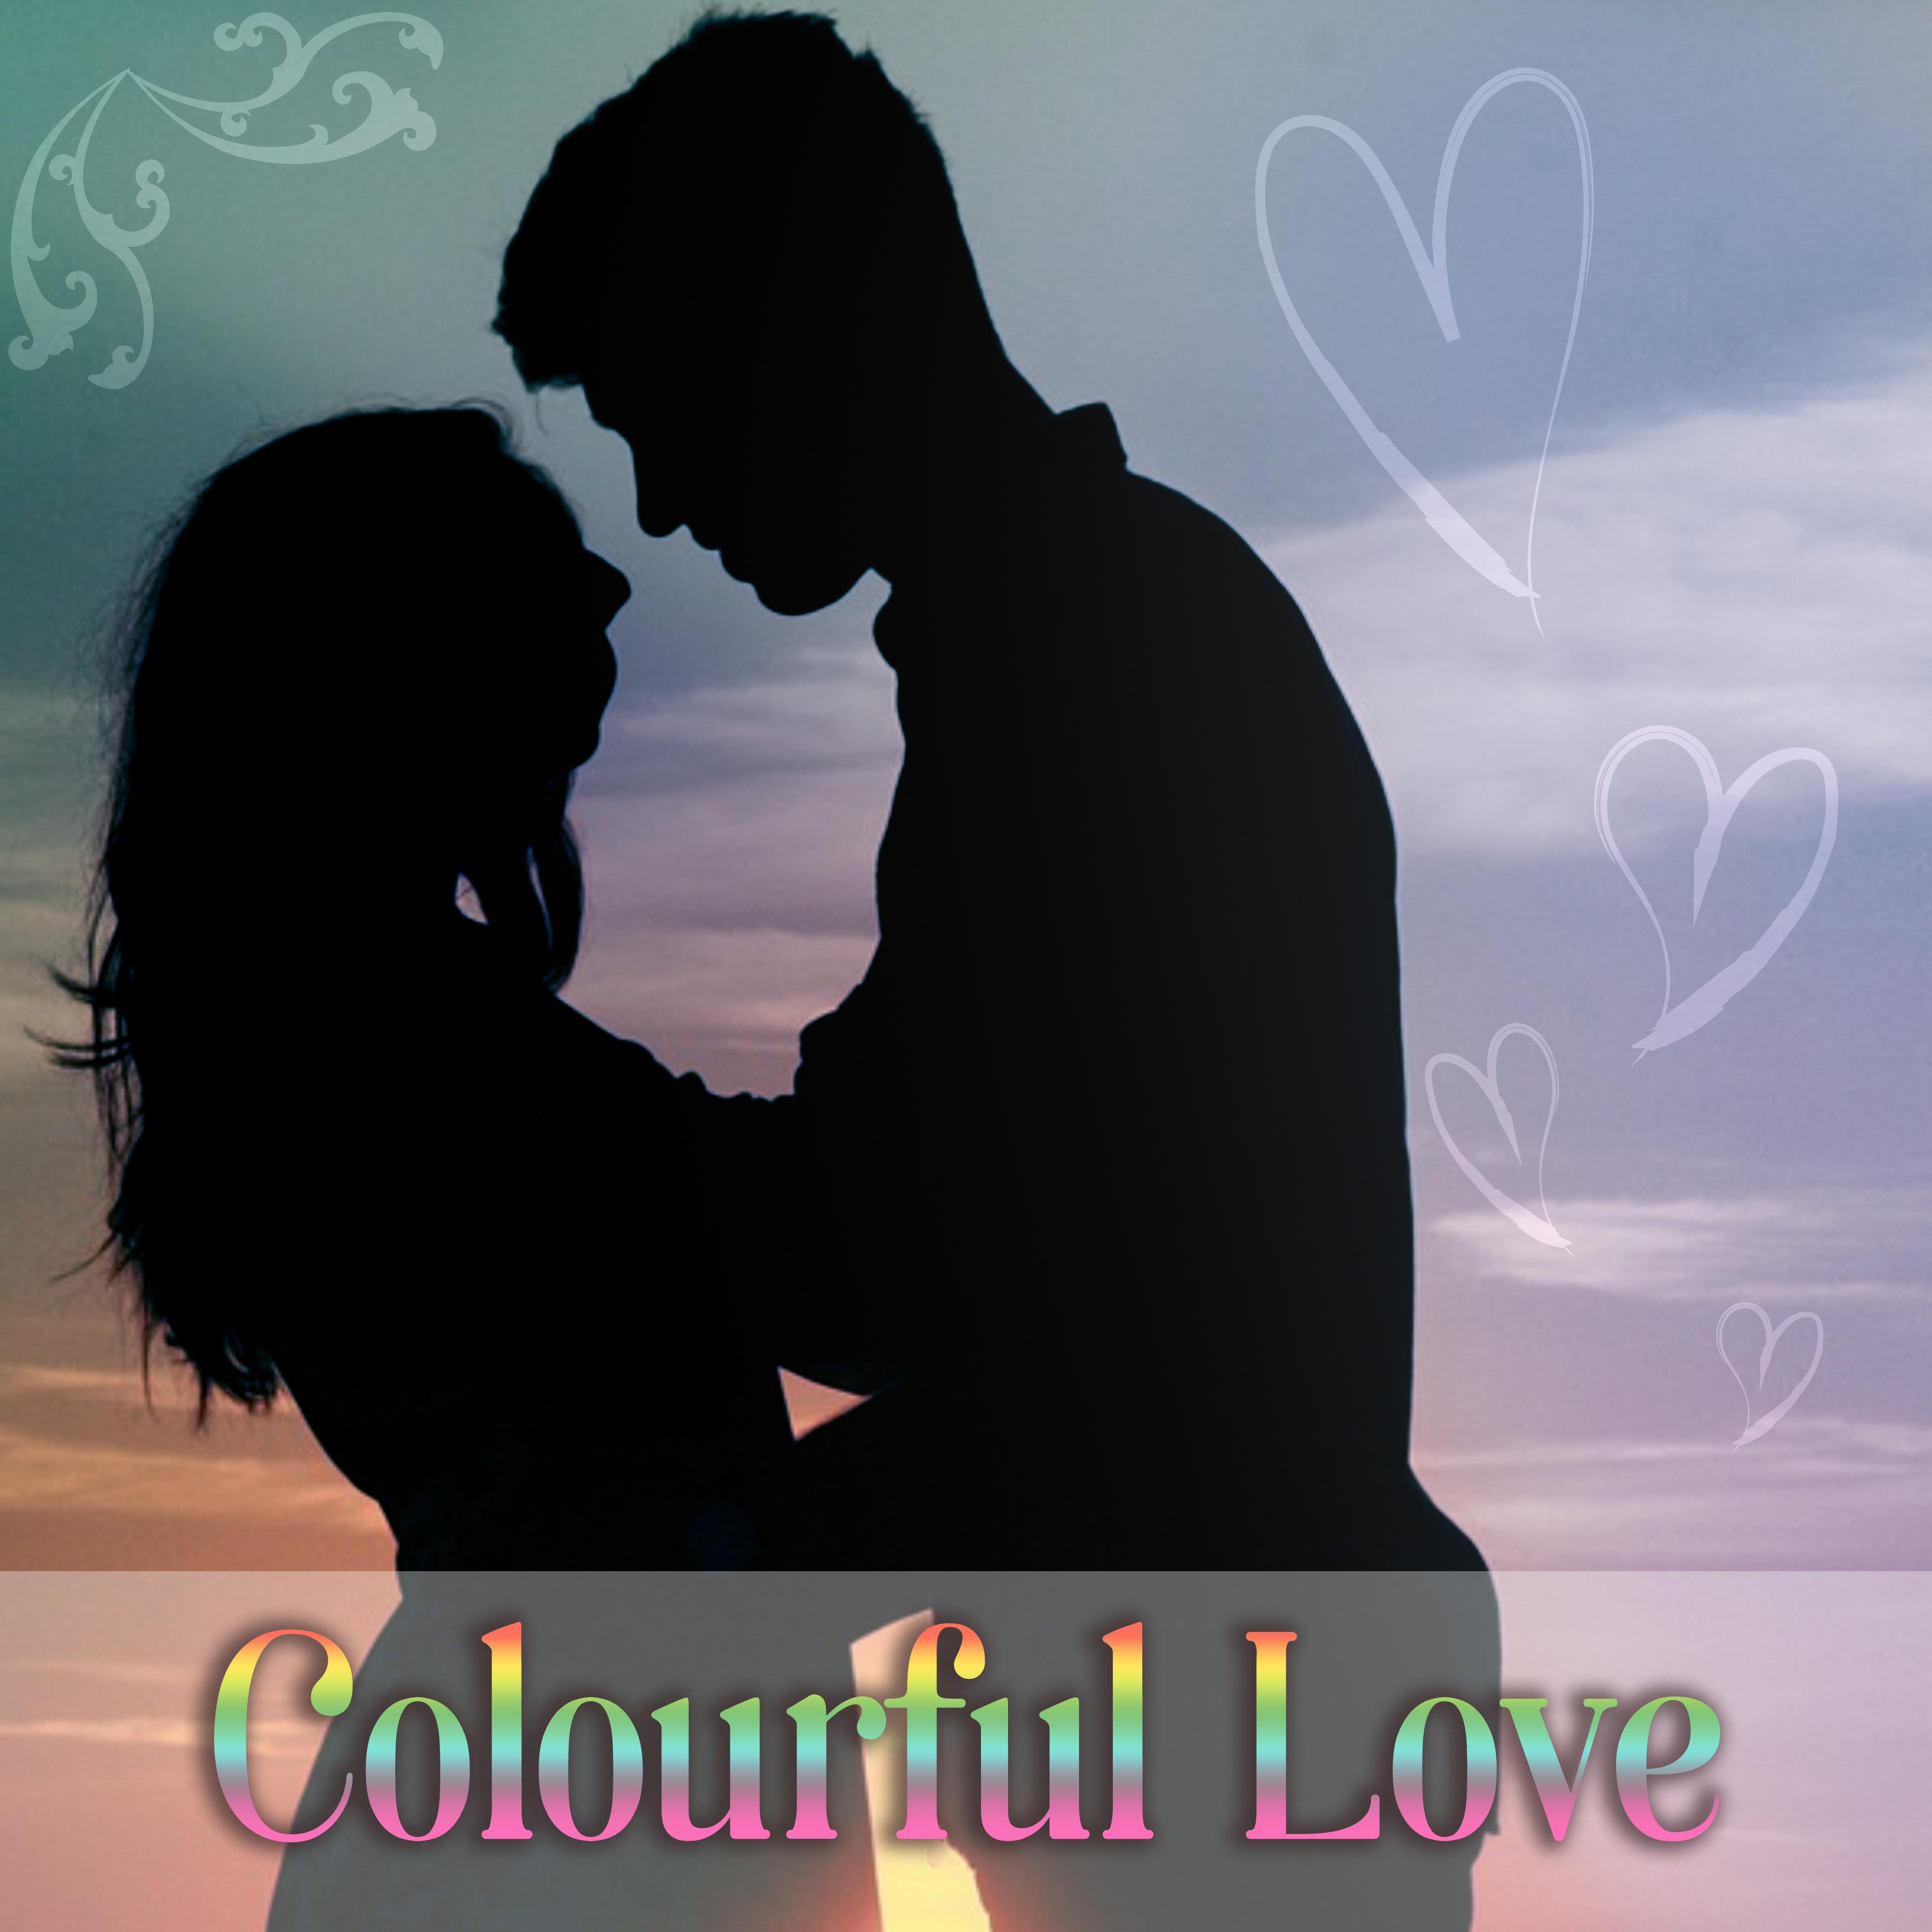 Colourful Love - Sweet Couple, Love Around, Strong Feeling, Romantic Music, Common Time